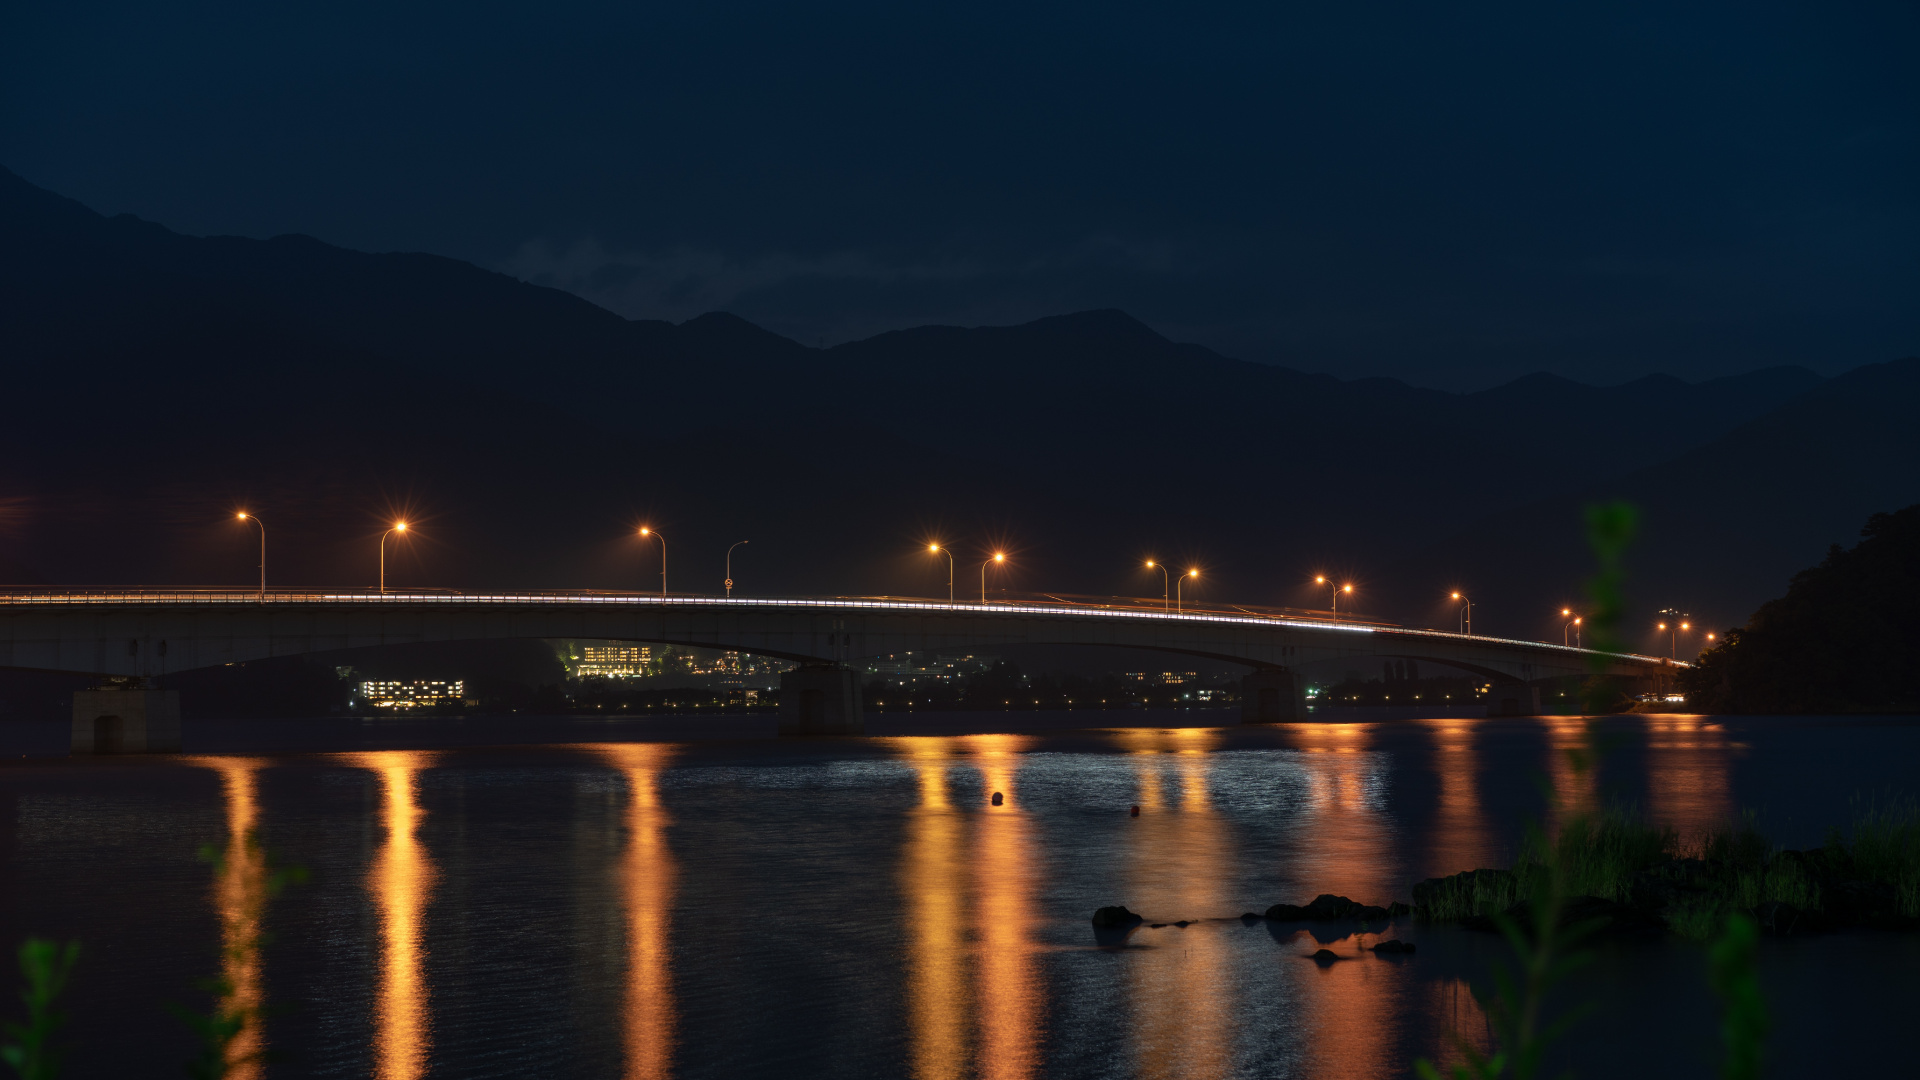 Lighted Bridge Over Water During Night Time. Wallpaper in 1920x1080 Resolution